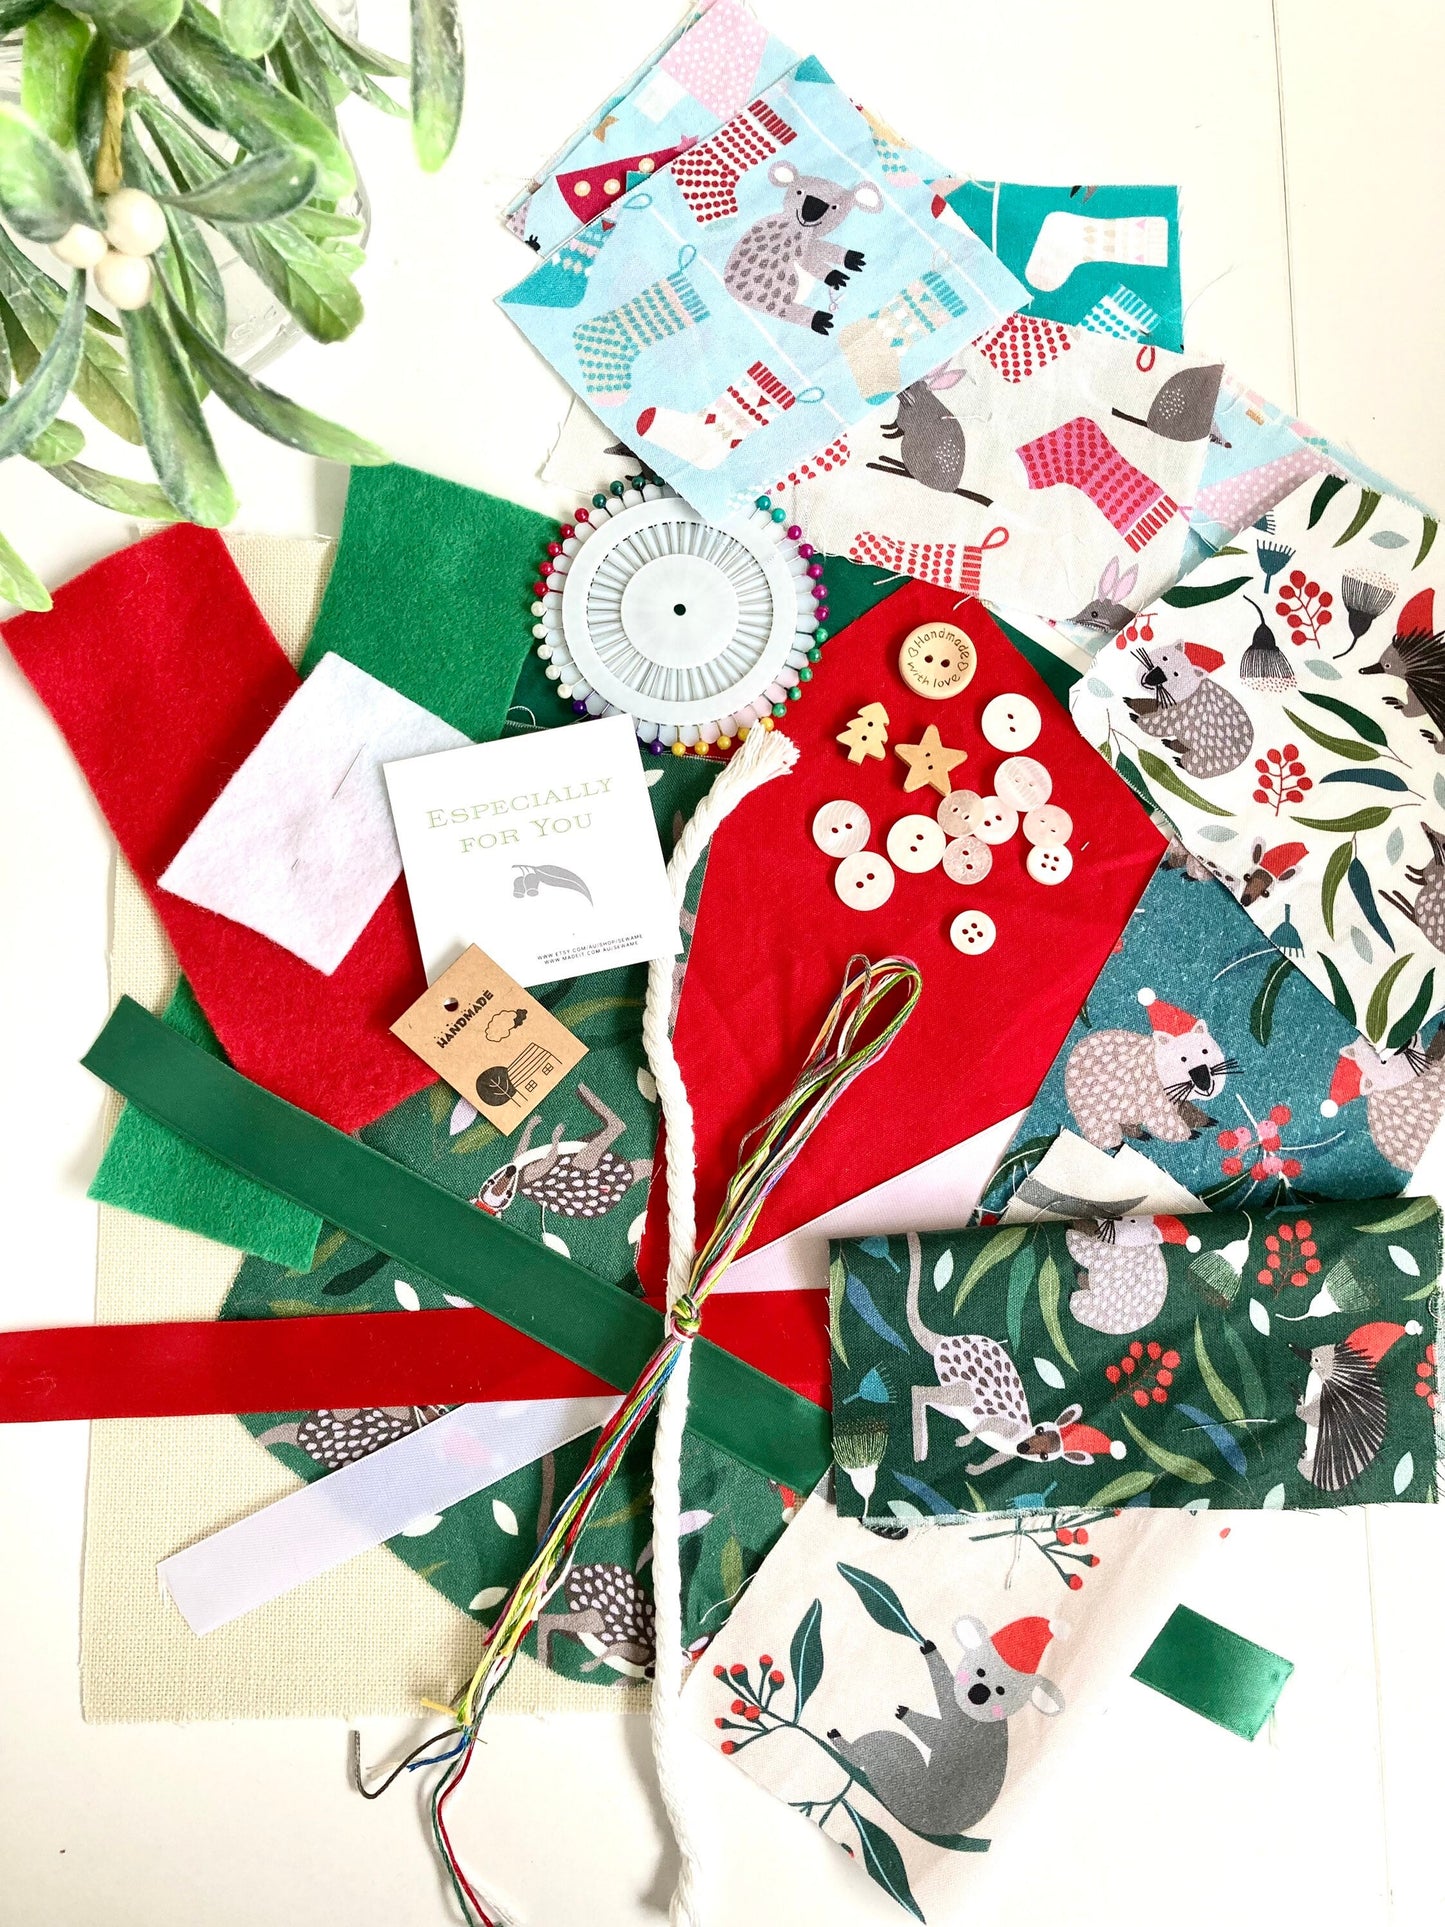 Christmas Craft Kit with Jocelyn Proust Fabrics, Slow Stitching Embroidery Kit, Do it Yourself Sewing Kit, DIY Sewing Project